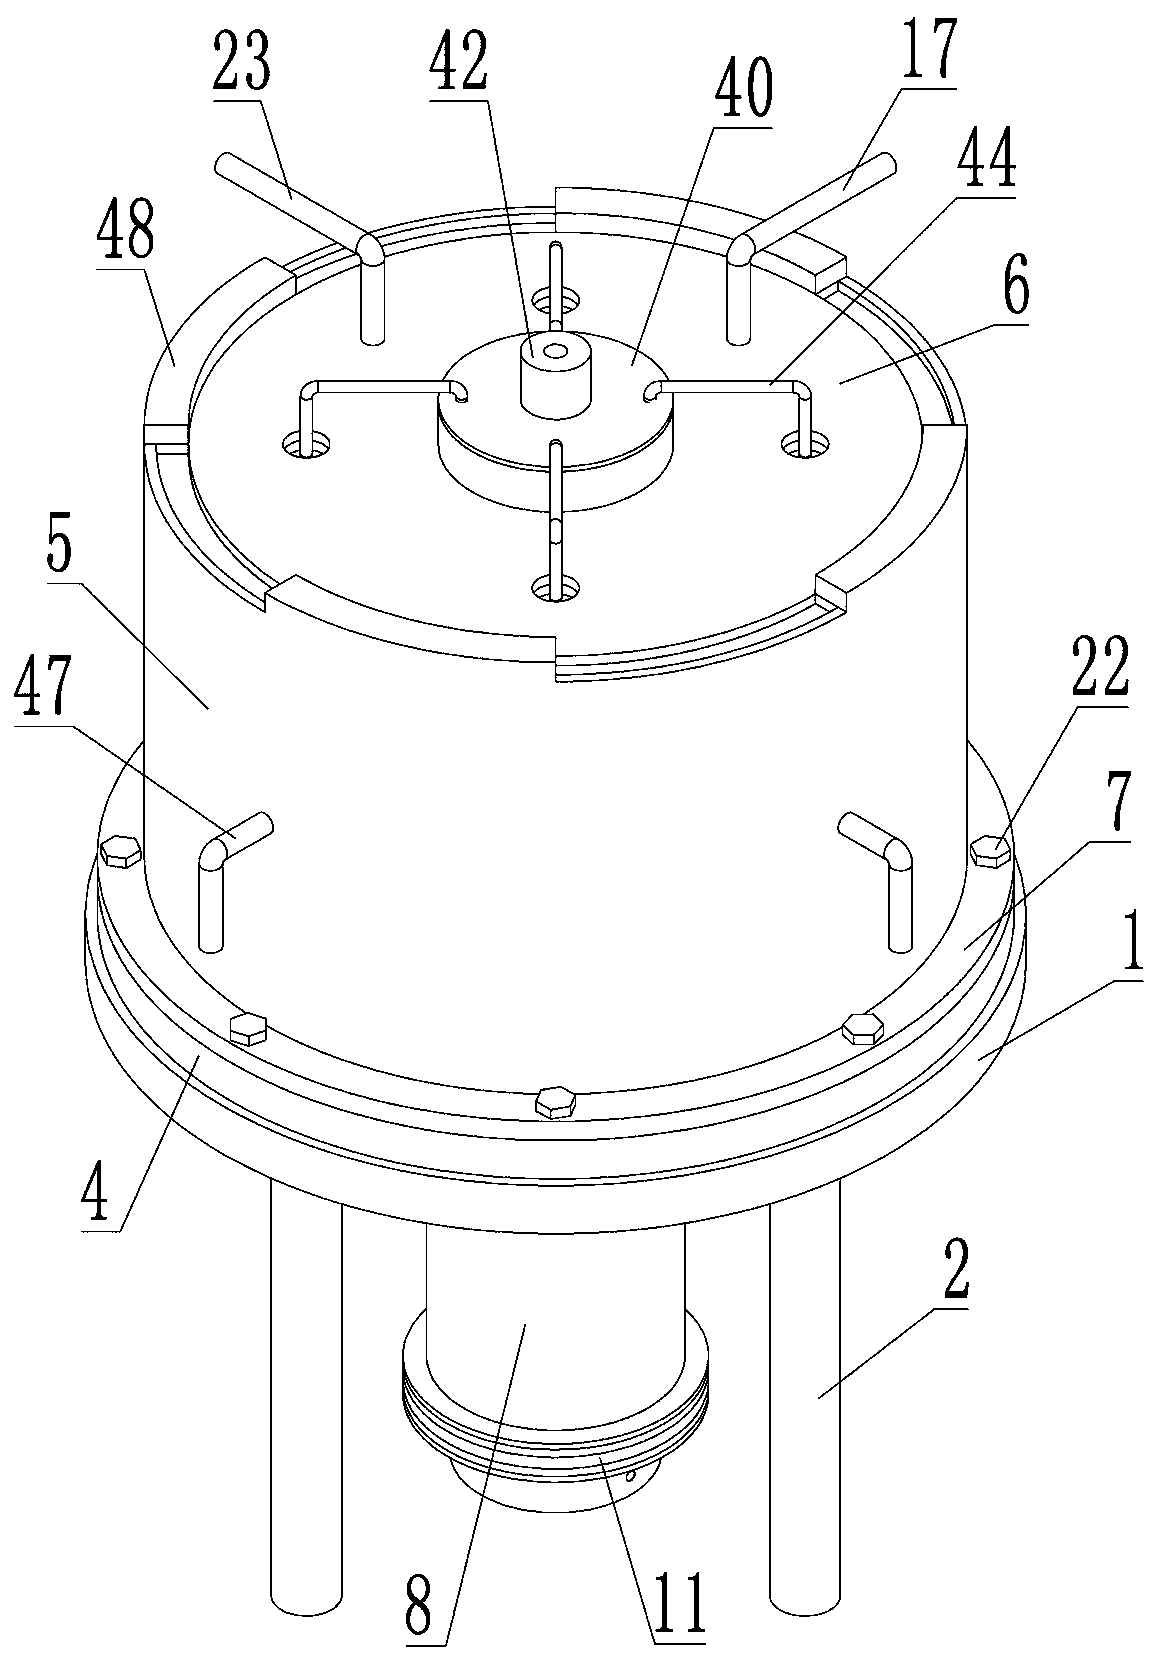 True triaxial experiment device and method capable of simulating radial pressure